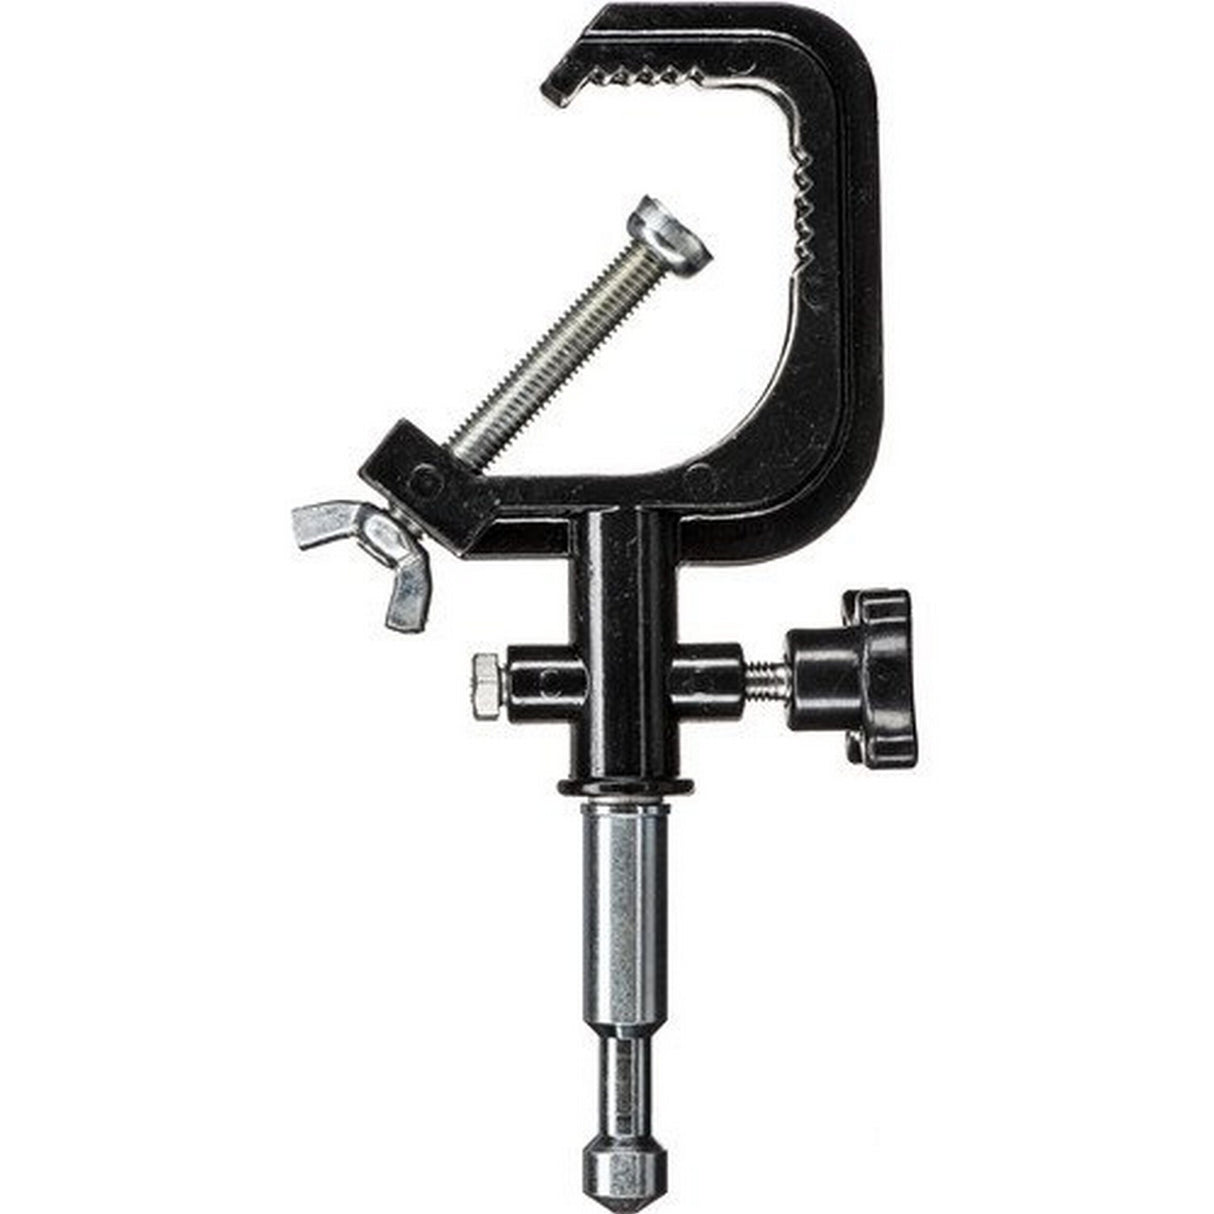 Dracast DRBBCMP Baby 5/8 Inch Pipe Clamp